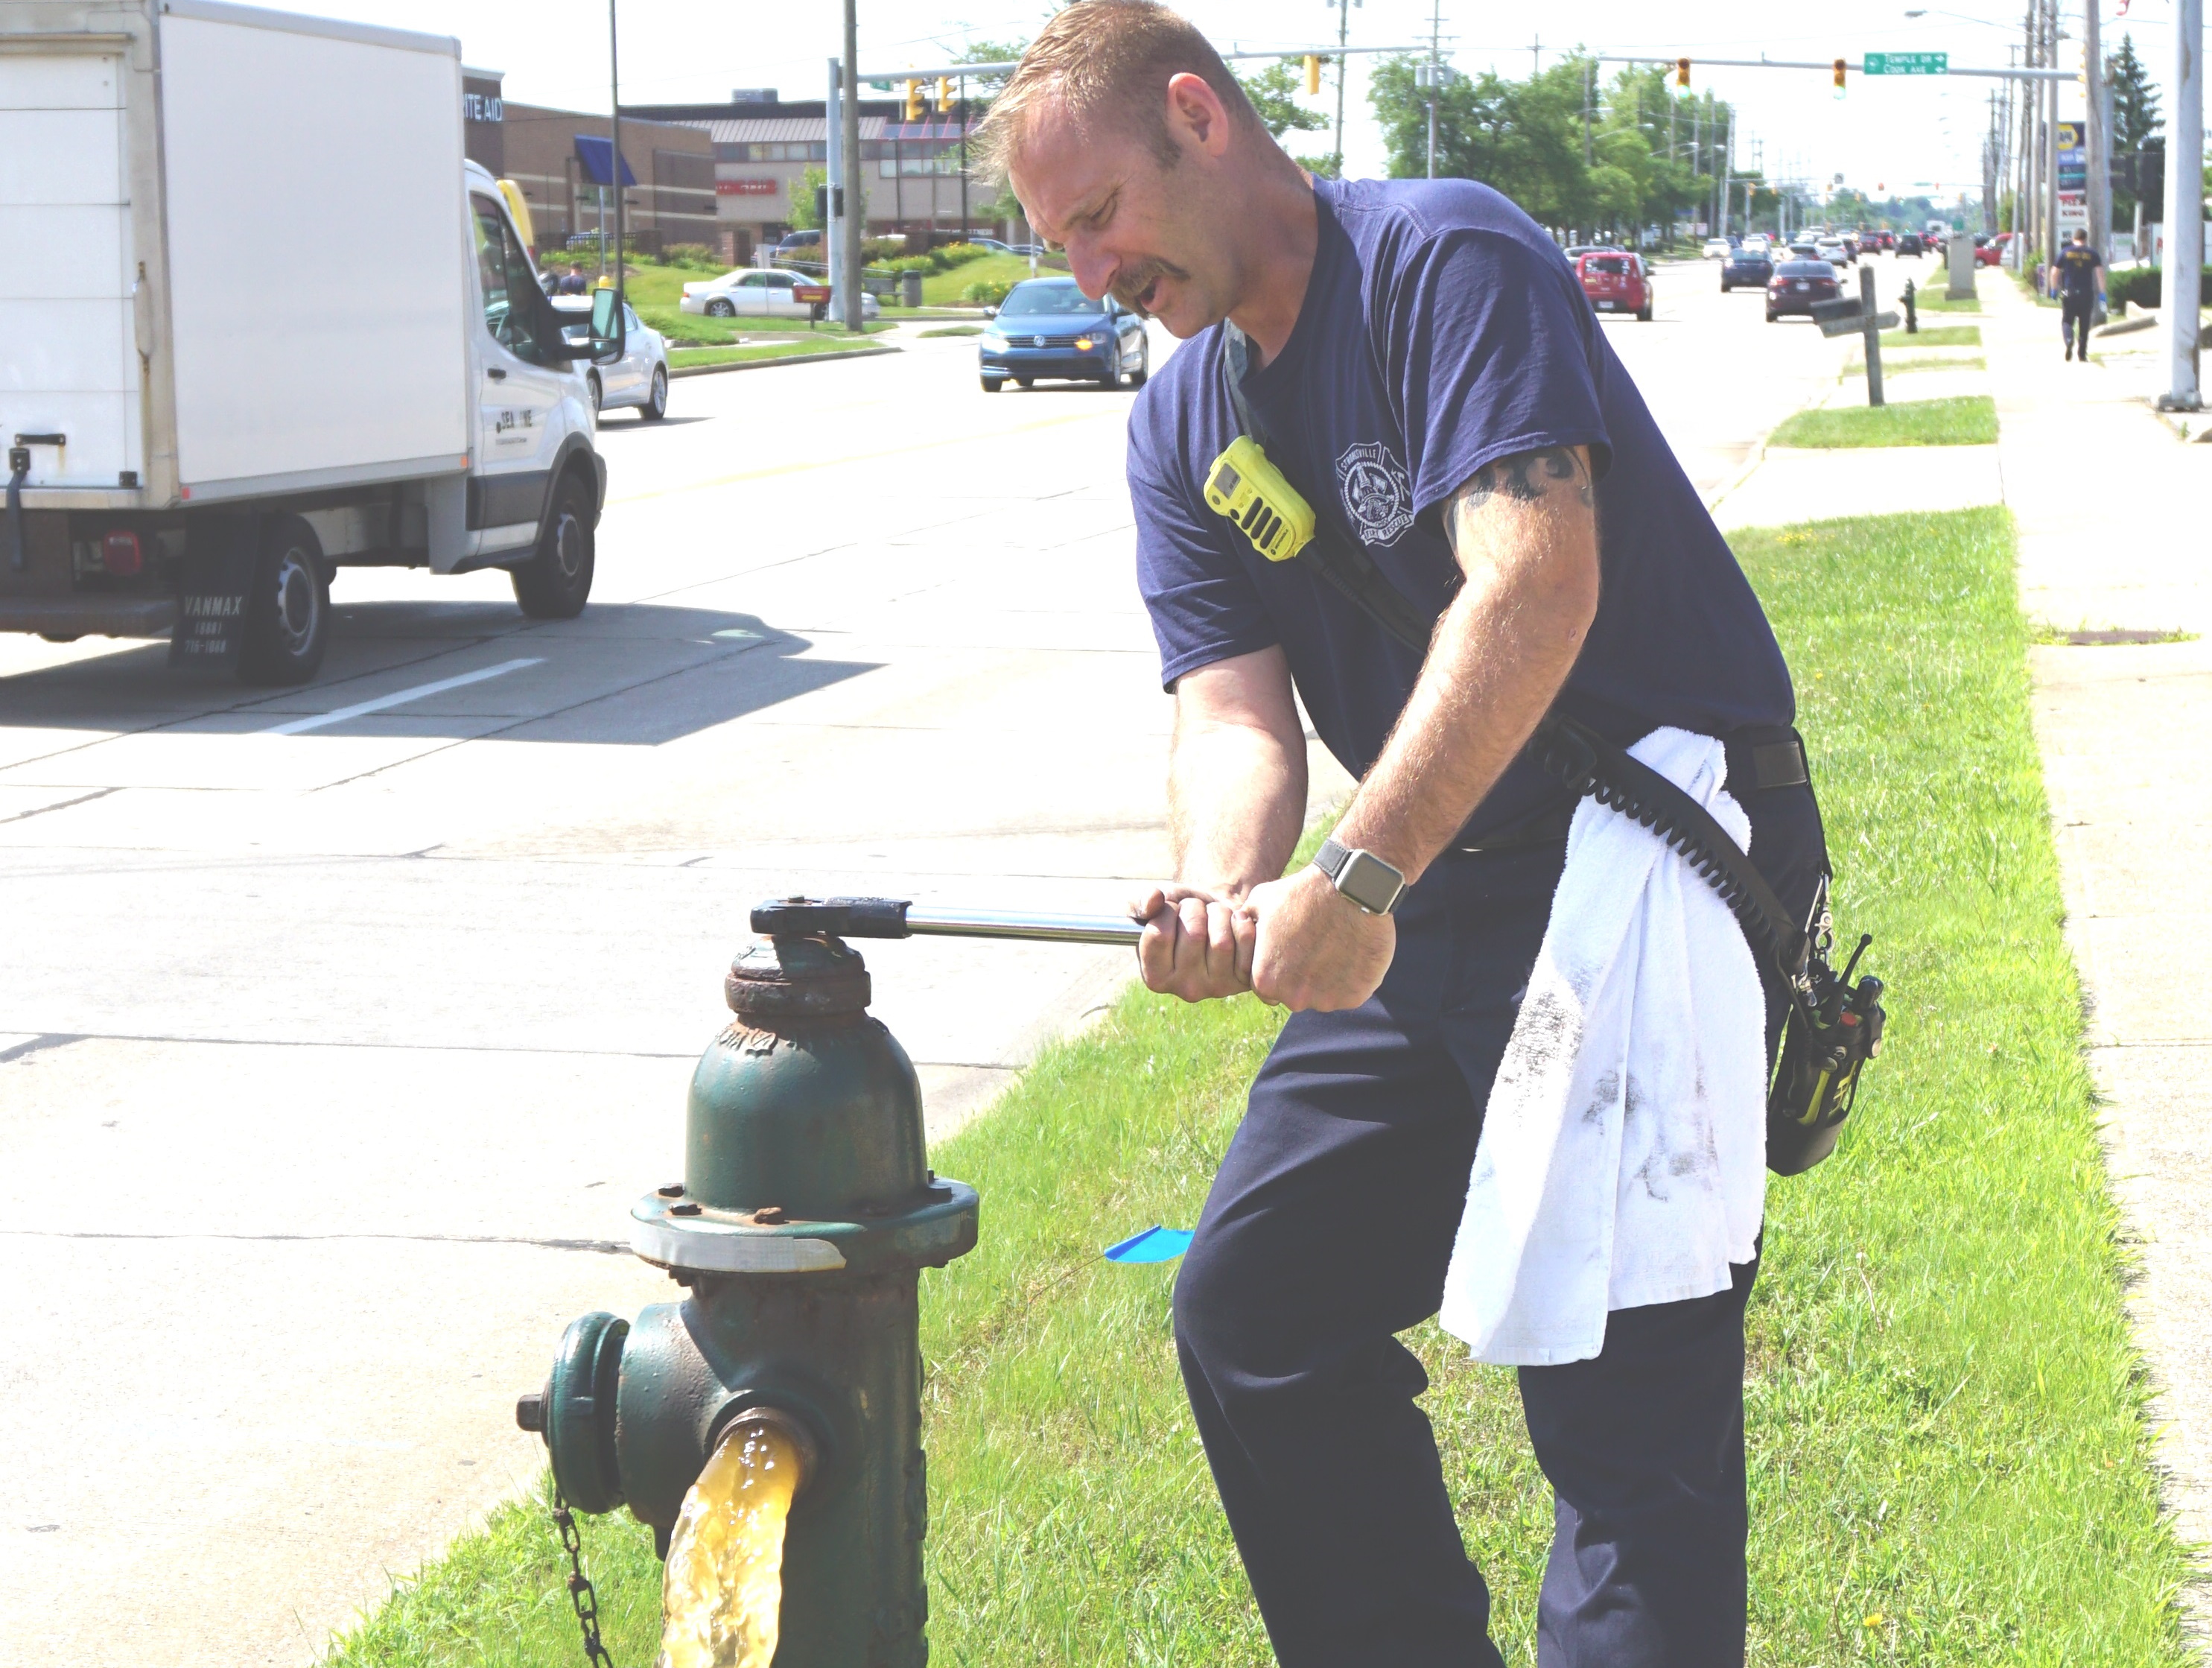 Spring Hydrant Flushing is Under Way